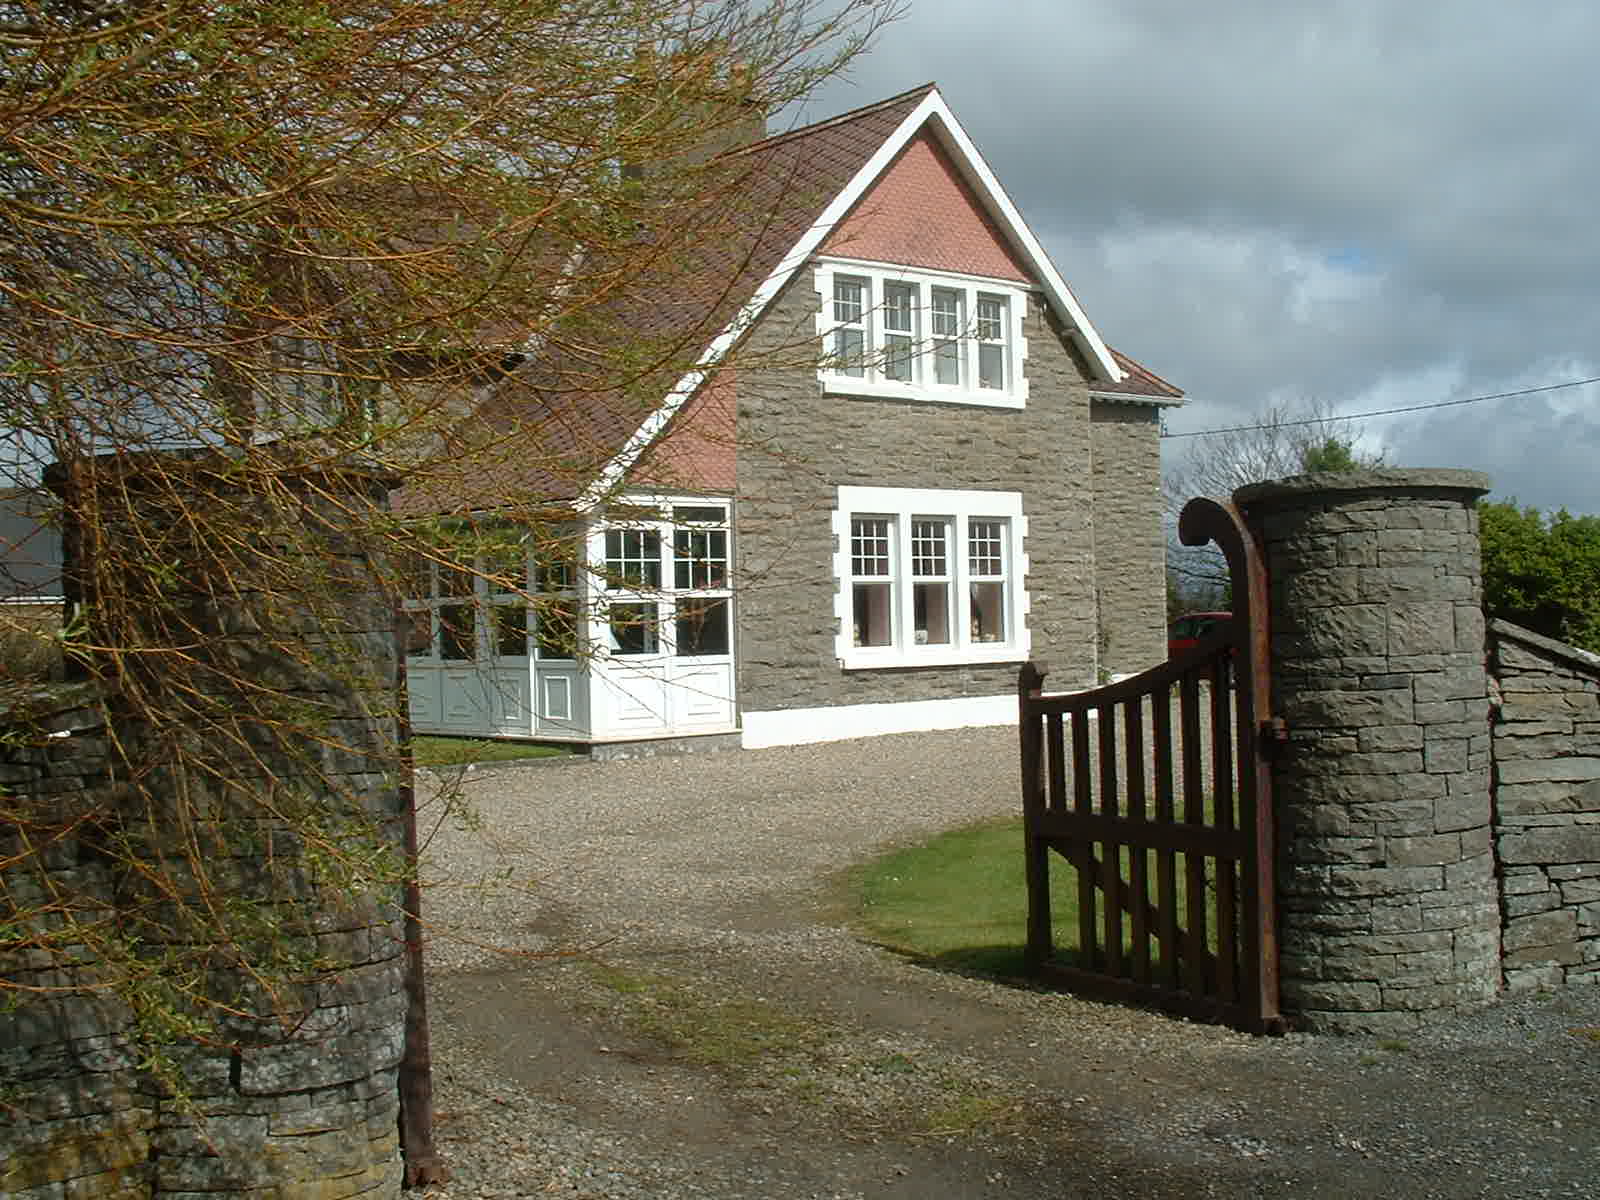 View of Willow Lodge, Lehinch from outside the gateway